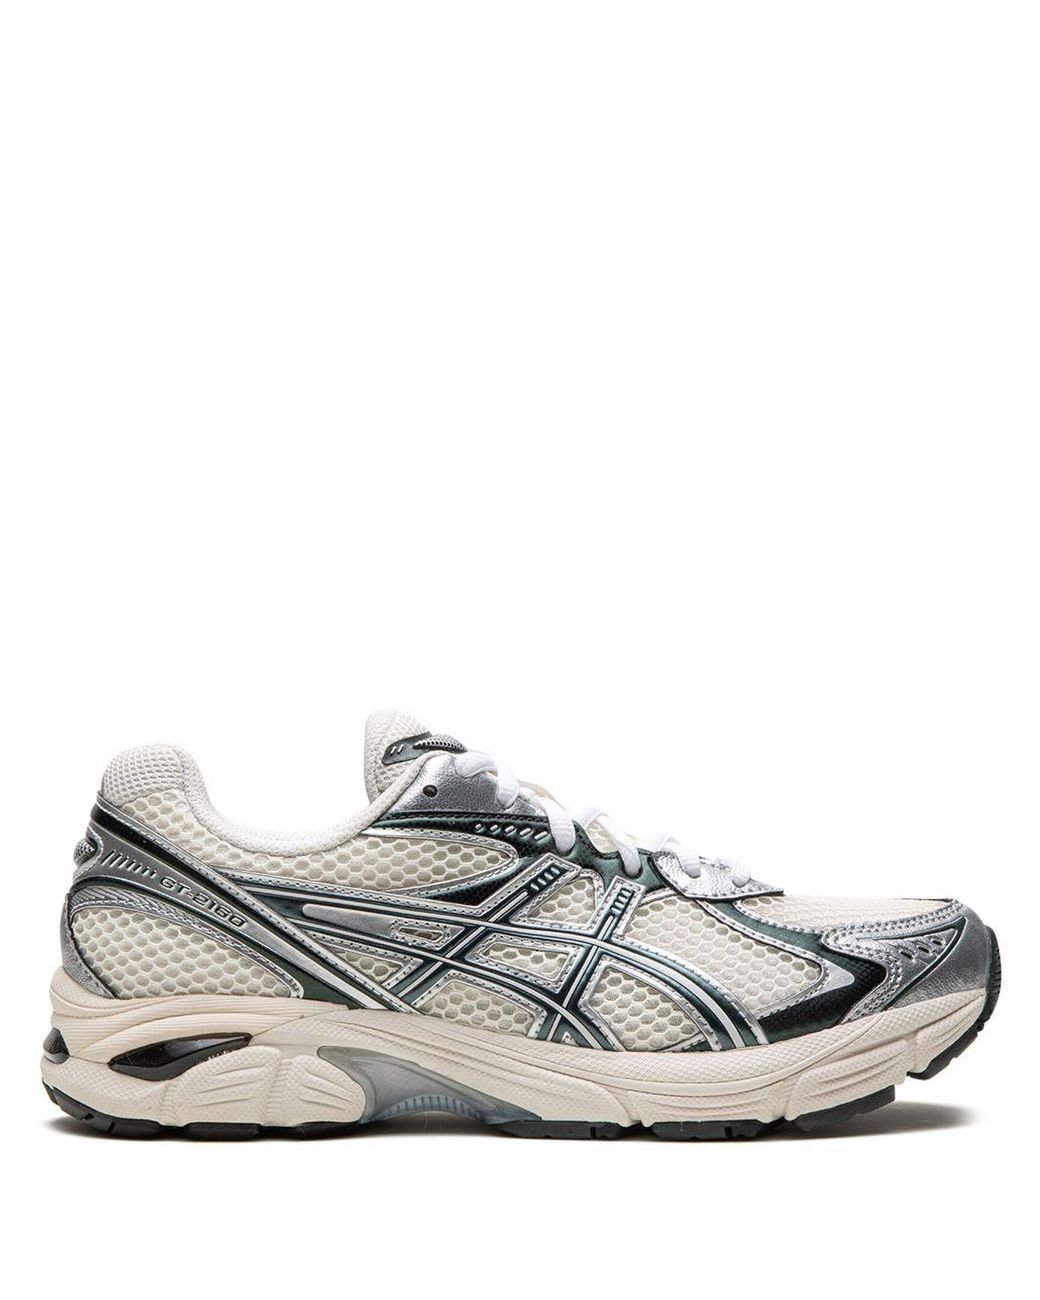 Asics X Kith Gt-2160 Sneakers in White | Lyst